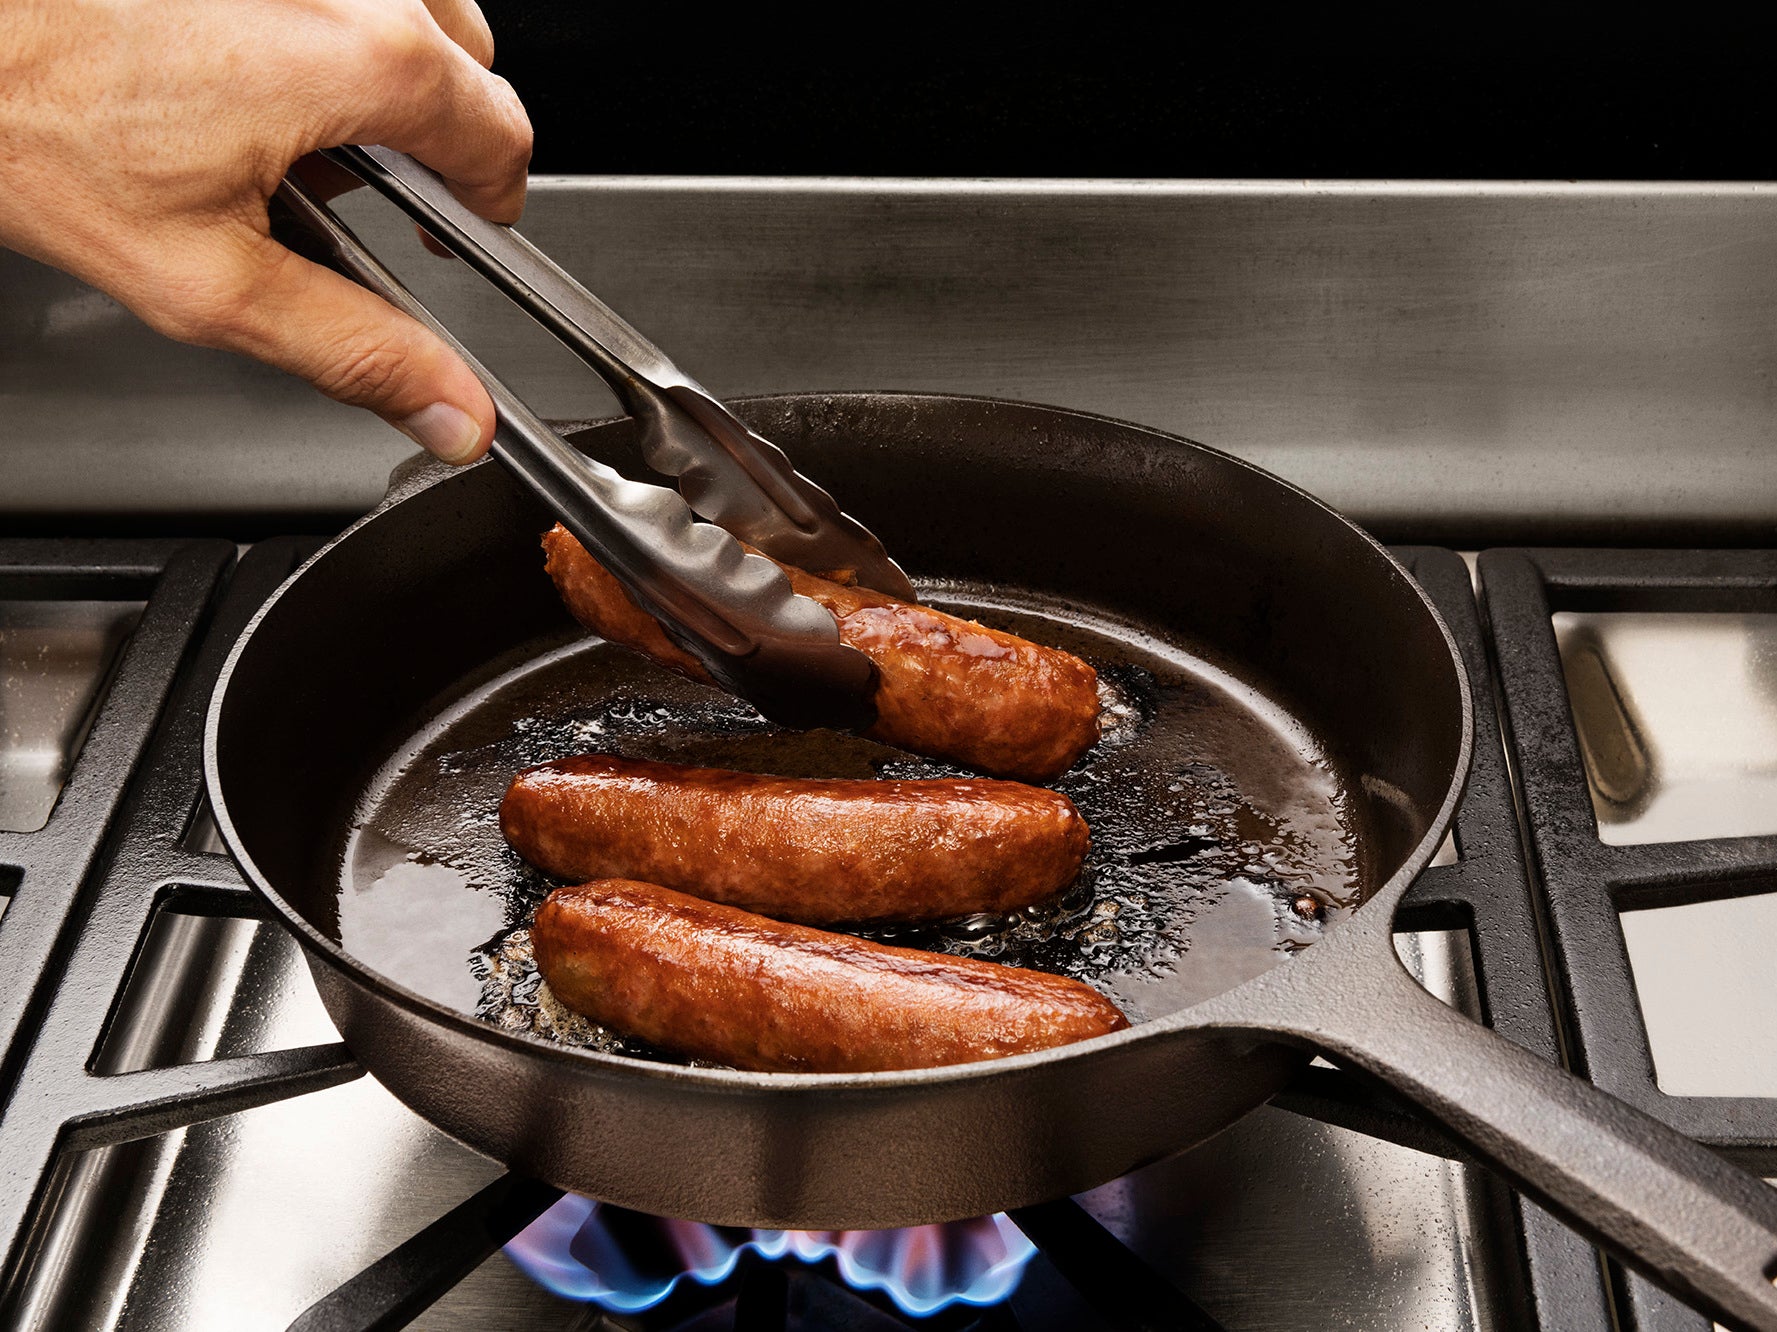 Beyond Sausages to launch in Tesco